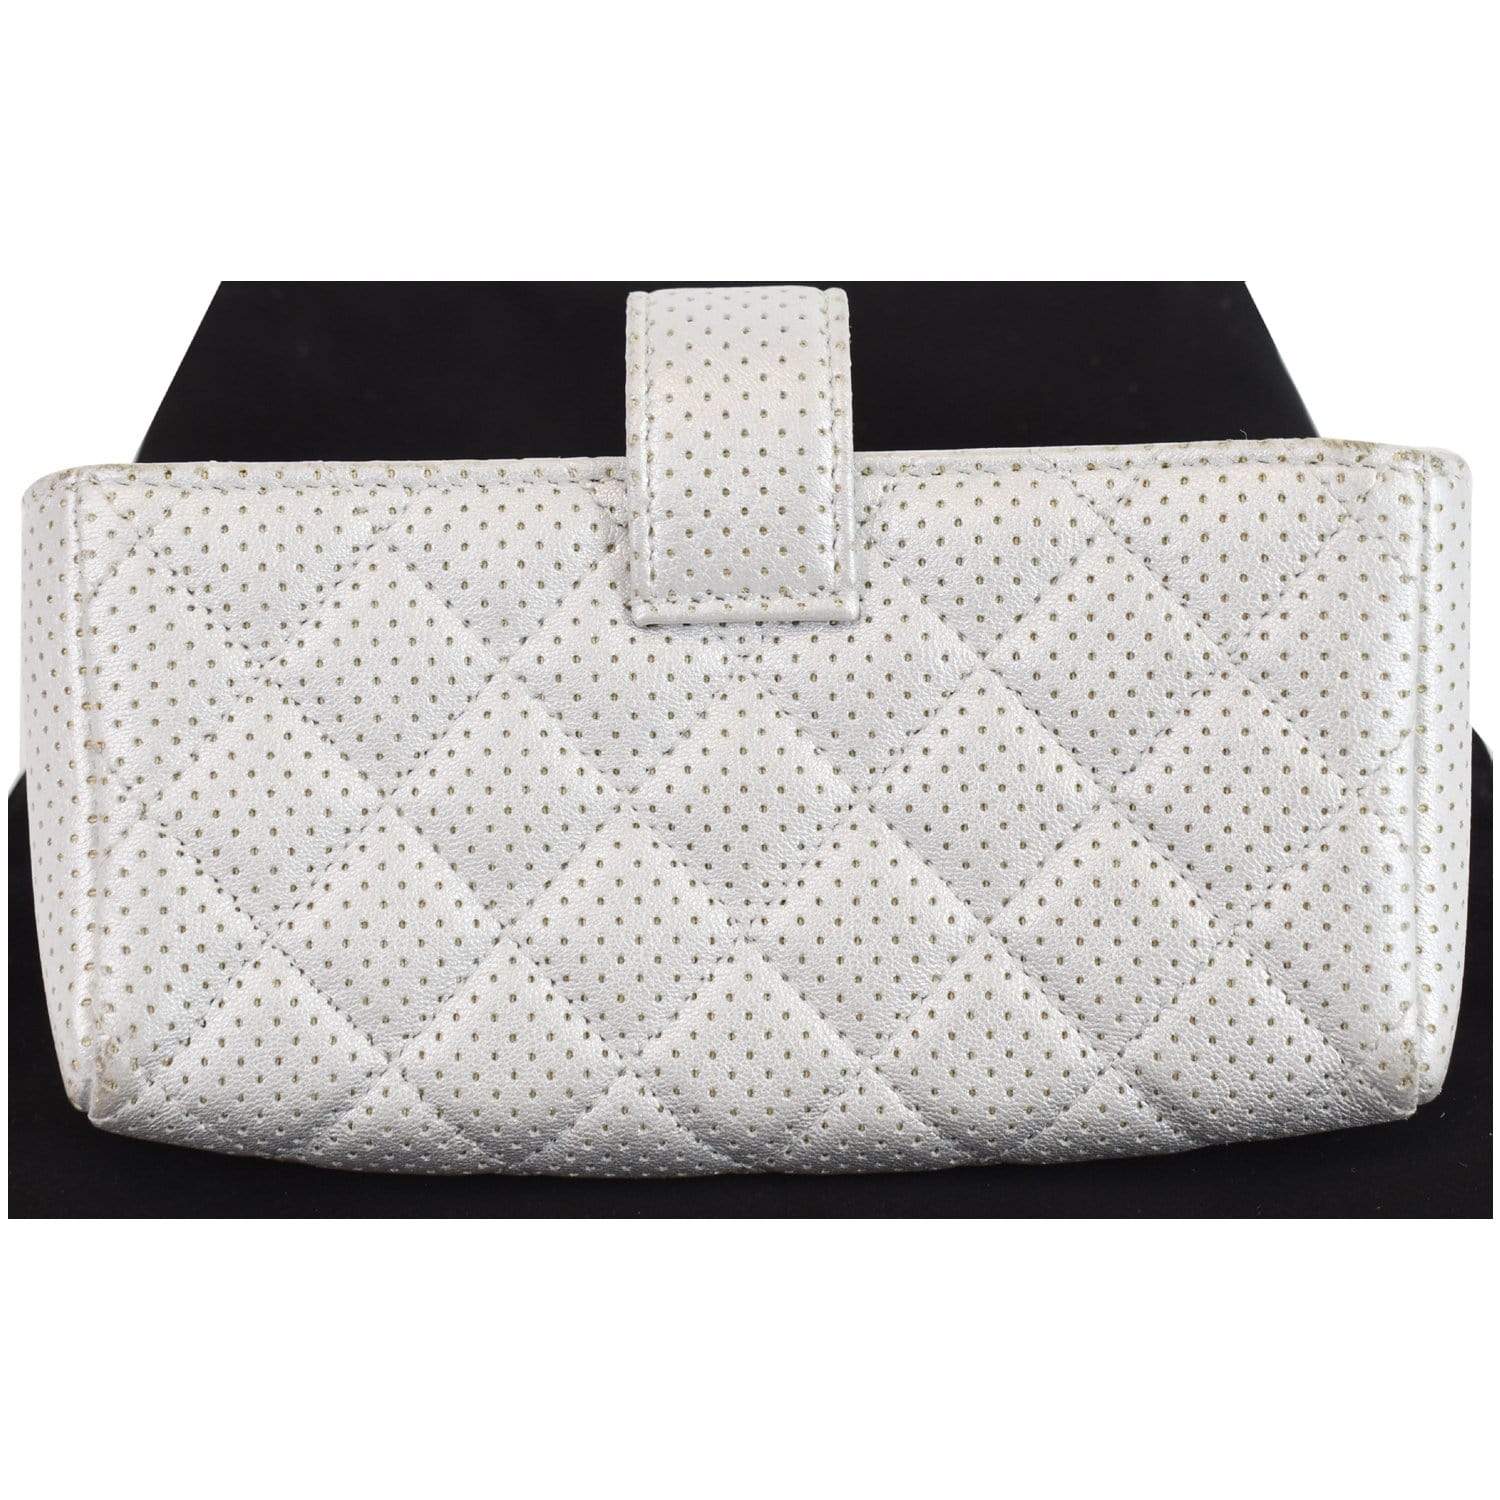 Chanel Perforated Lambskin Quilted Mini Phone Holder